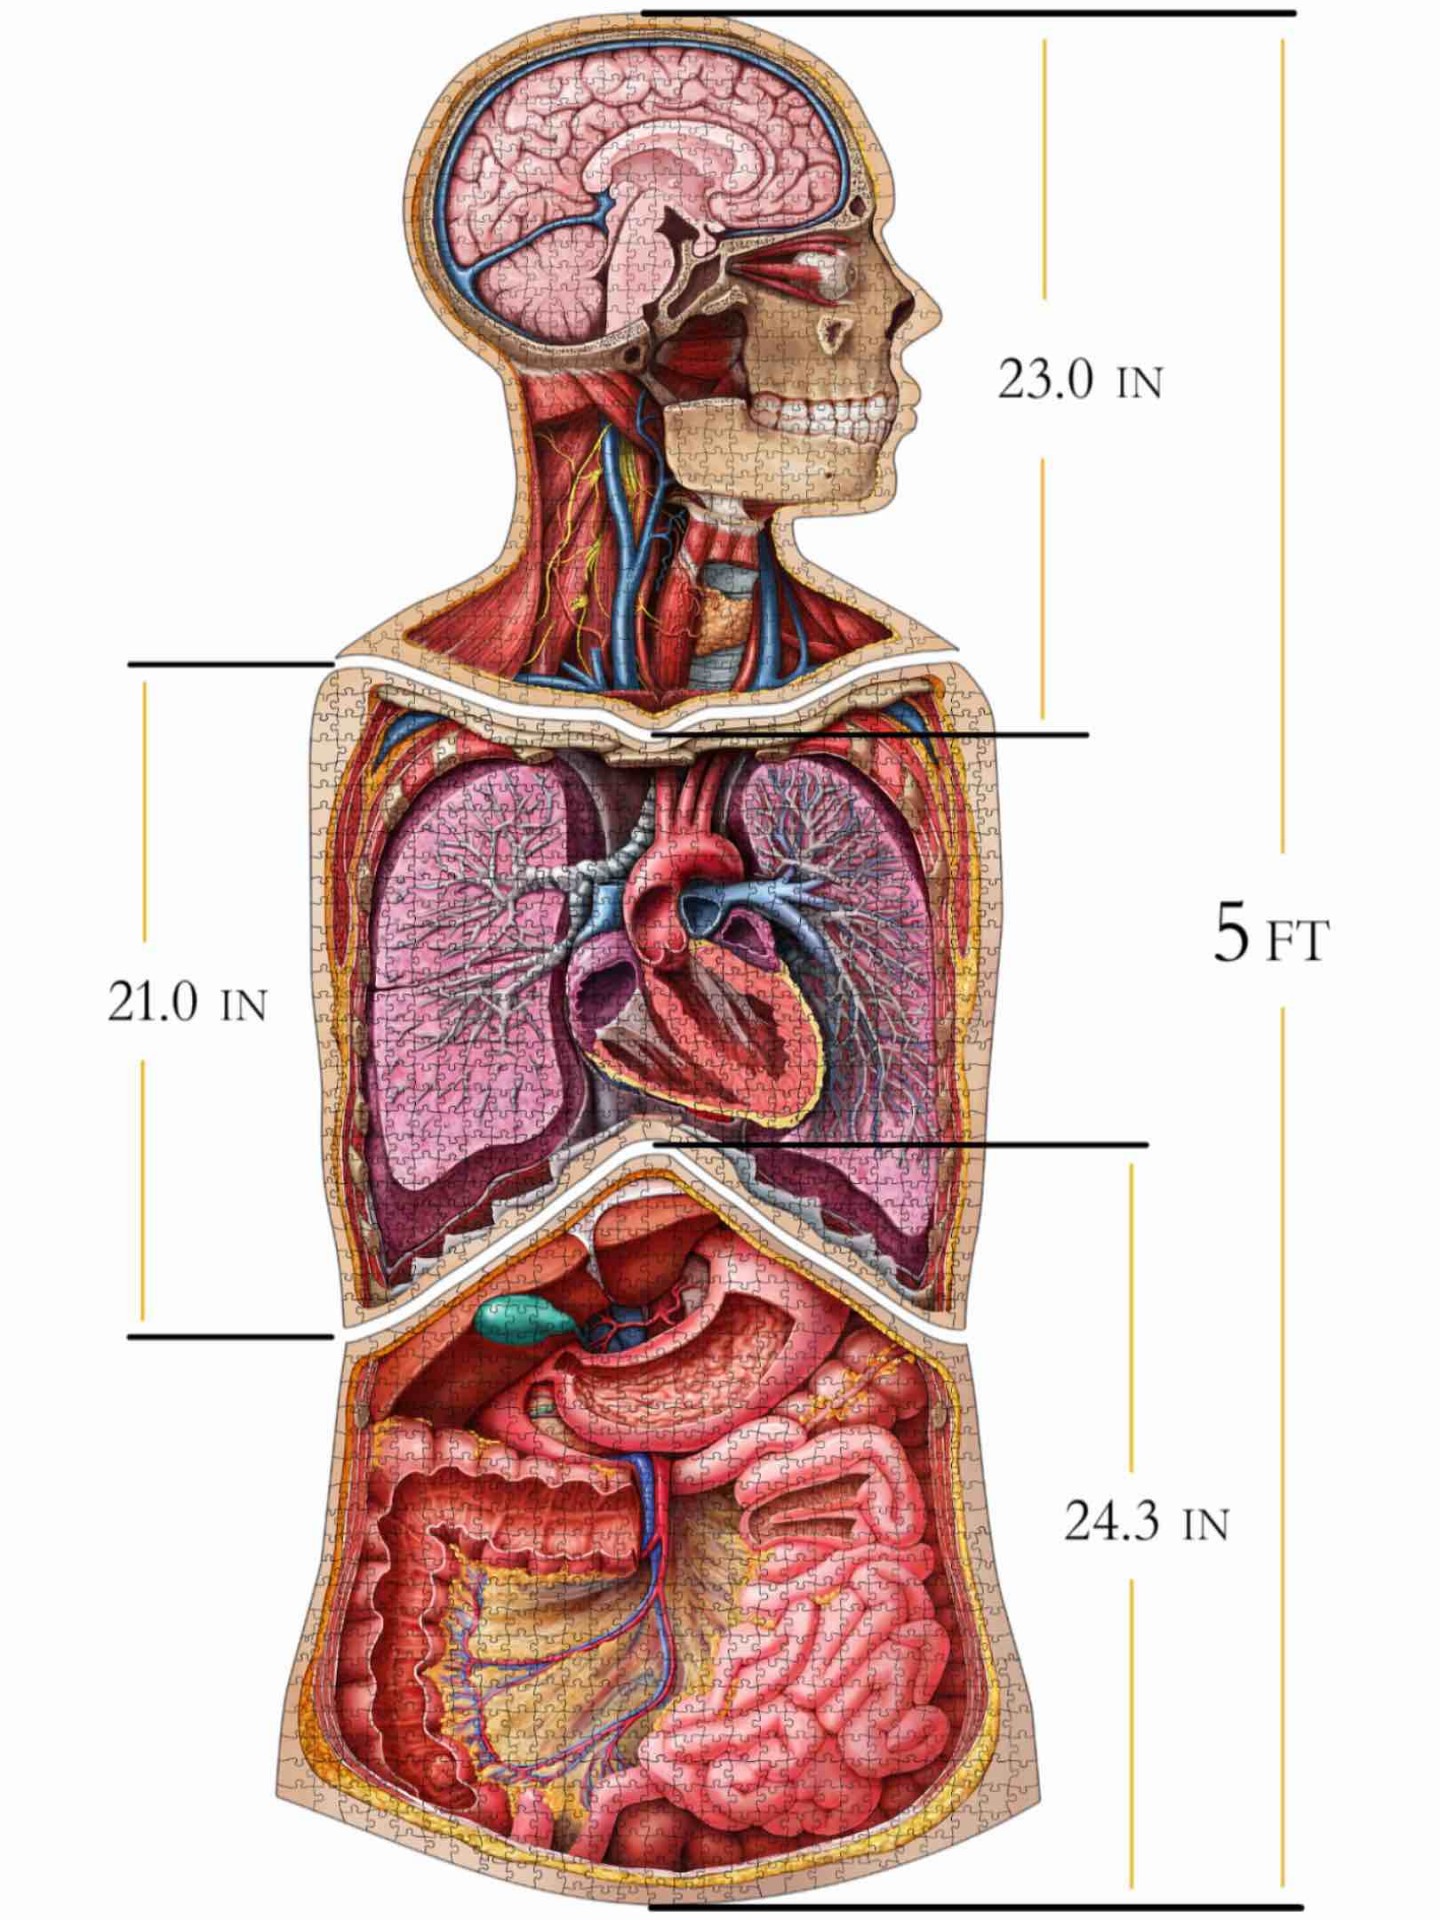 dr-livingstons-human-anatomy-jigsaw-puzzles-combined